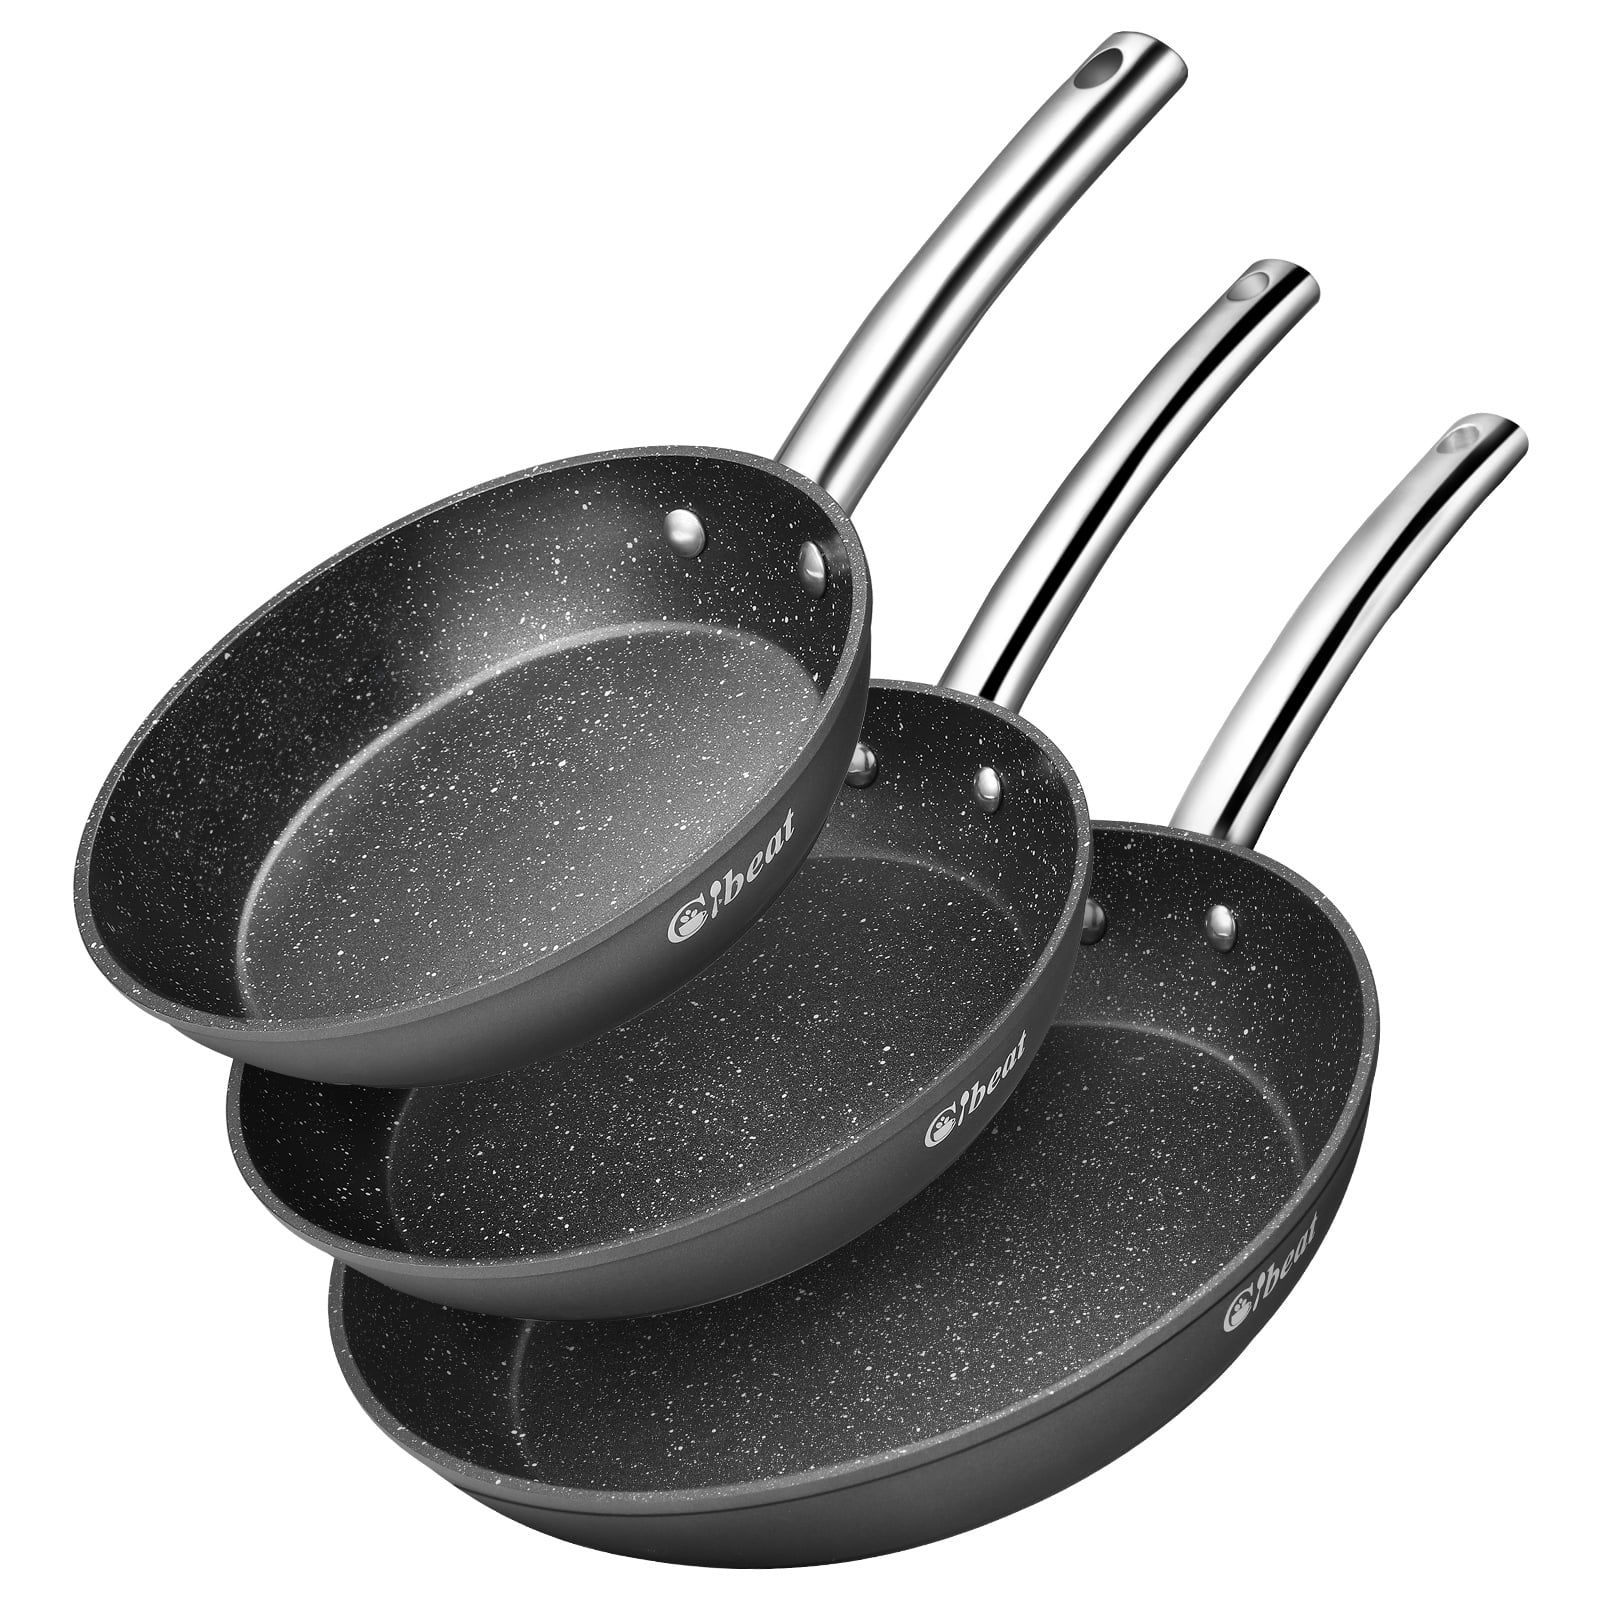 Tfal Cookware Set Nonstick Omelette Fry Saute Pan Skillet Kitchen Cooking Gray 